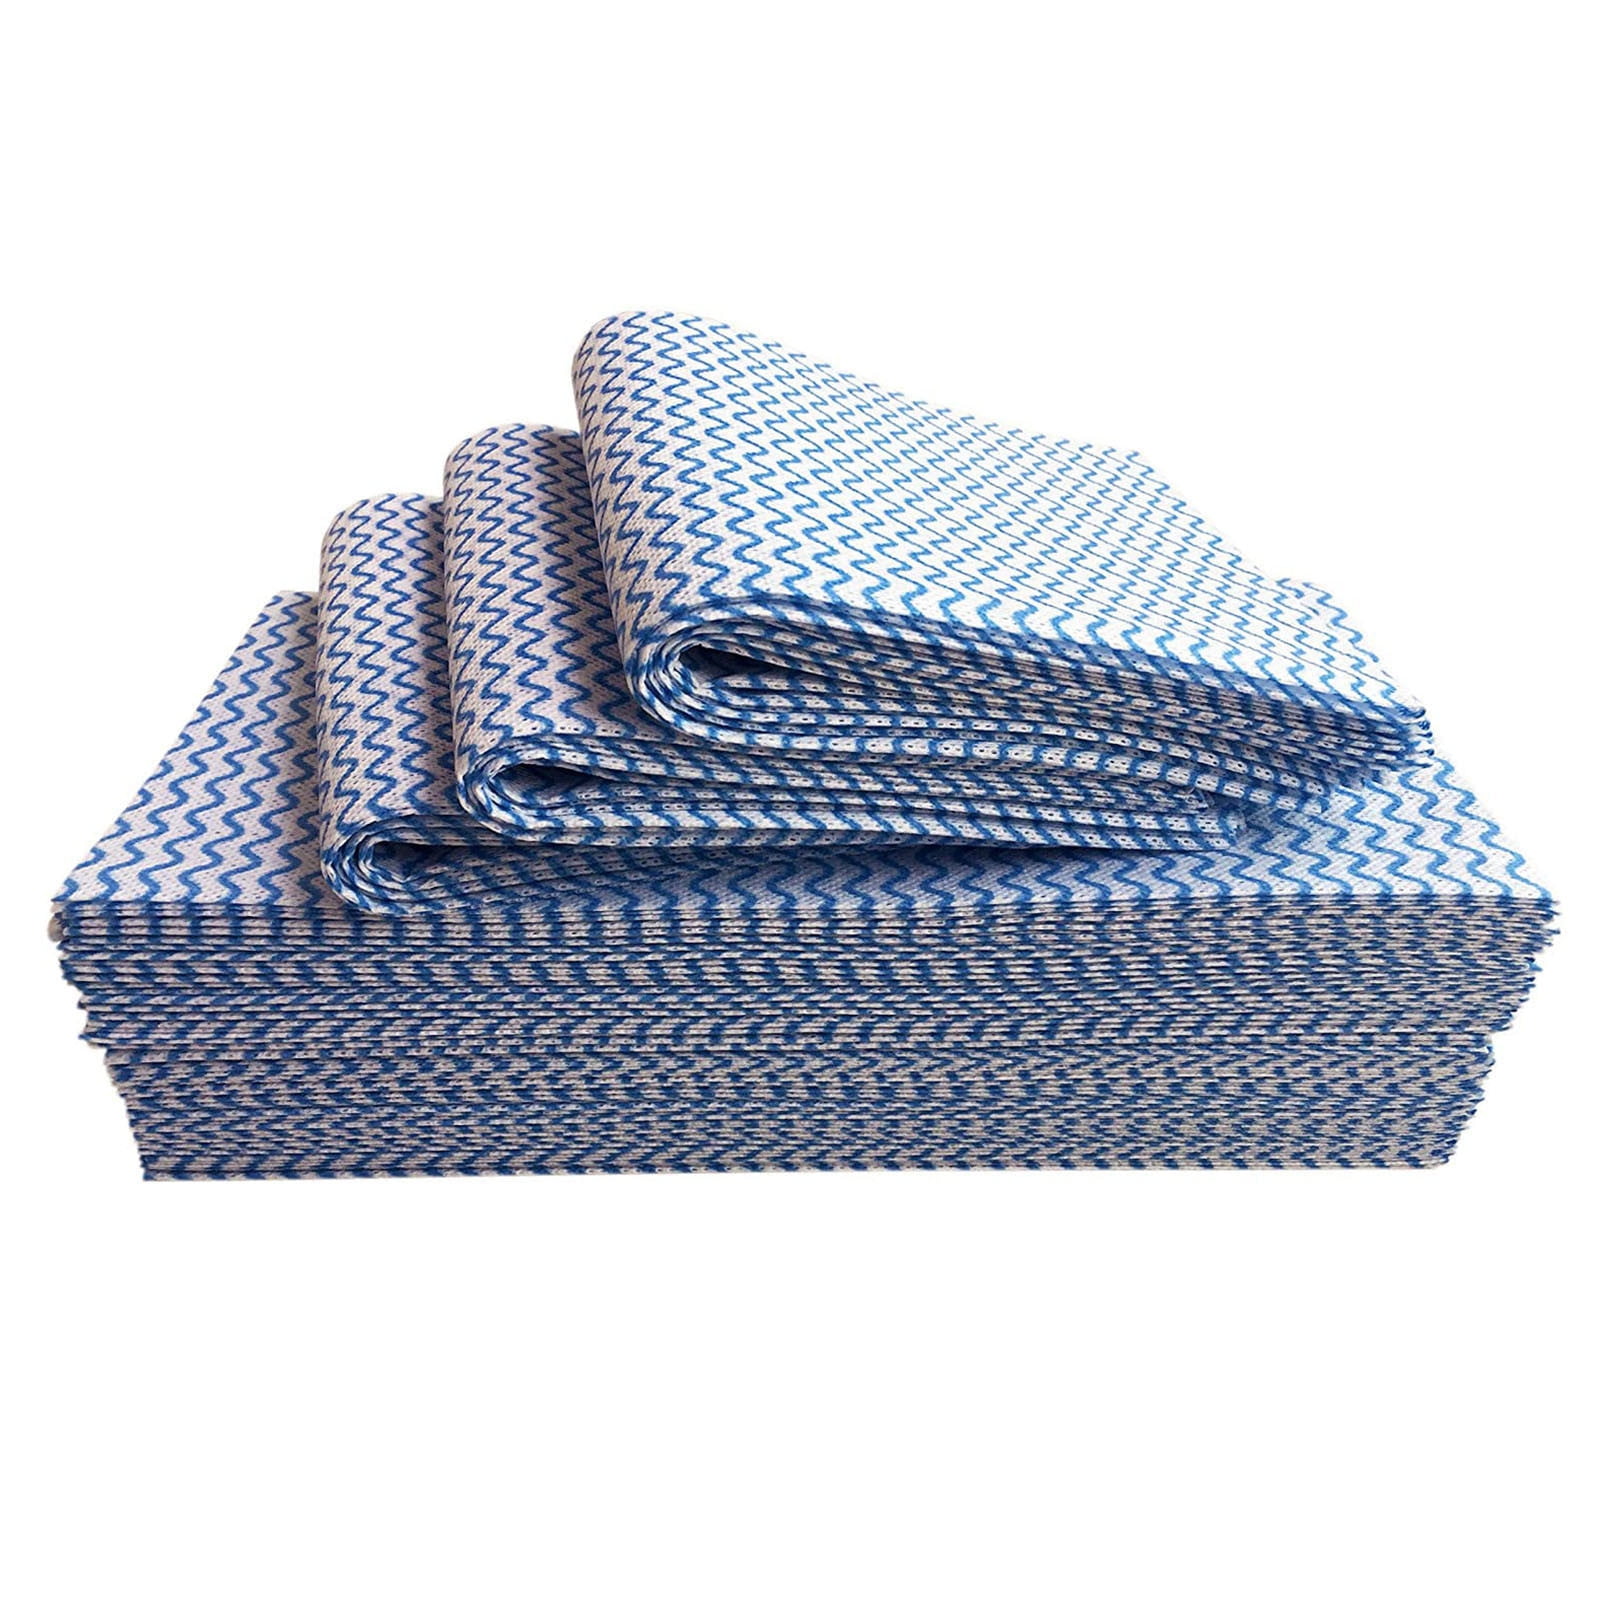  Experience The Best in Dish Cloths - Soft, Absorbent